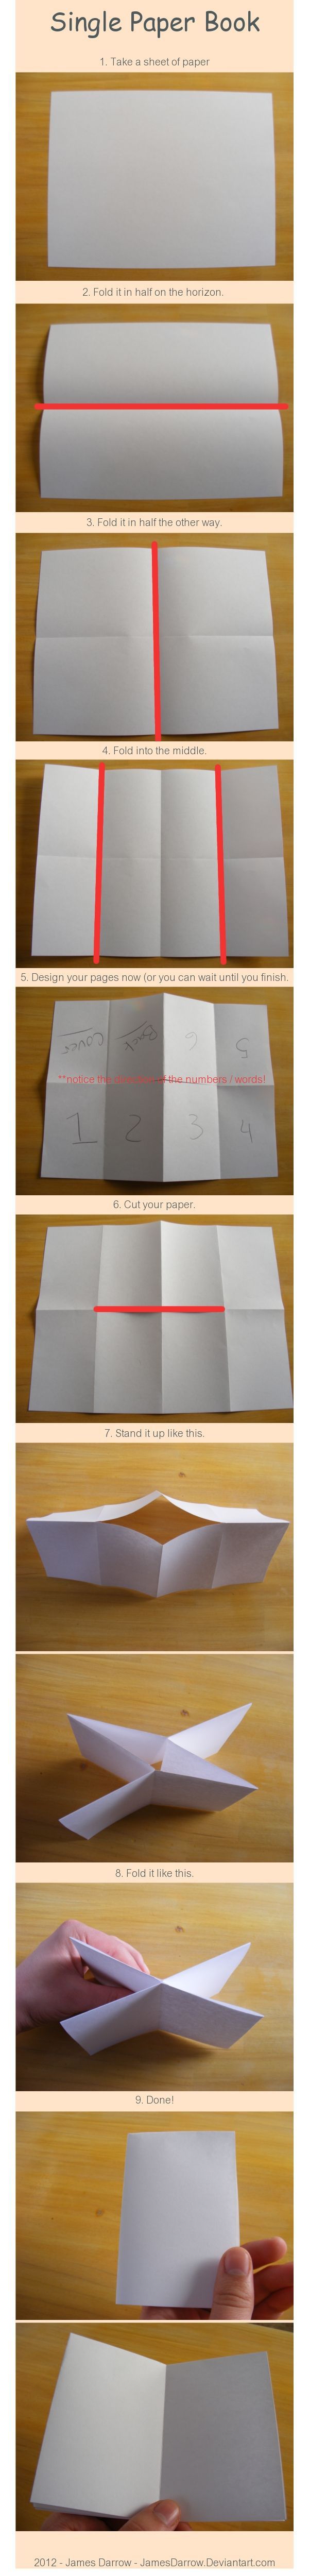 Single sheet of paper = mini book – great for writing center